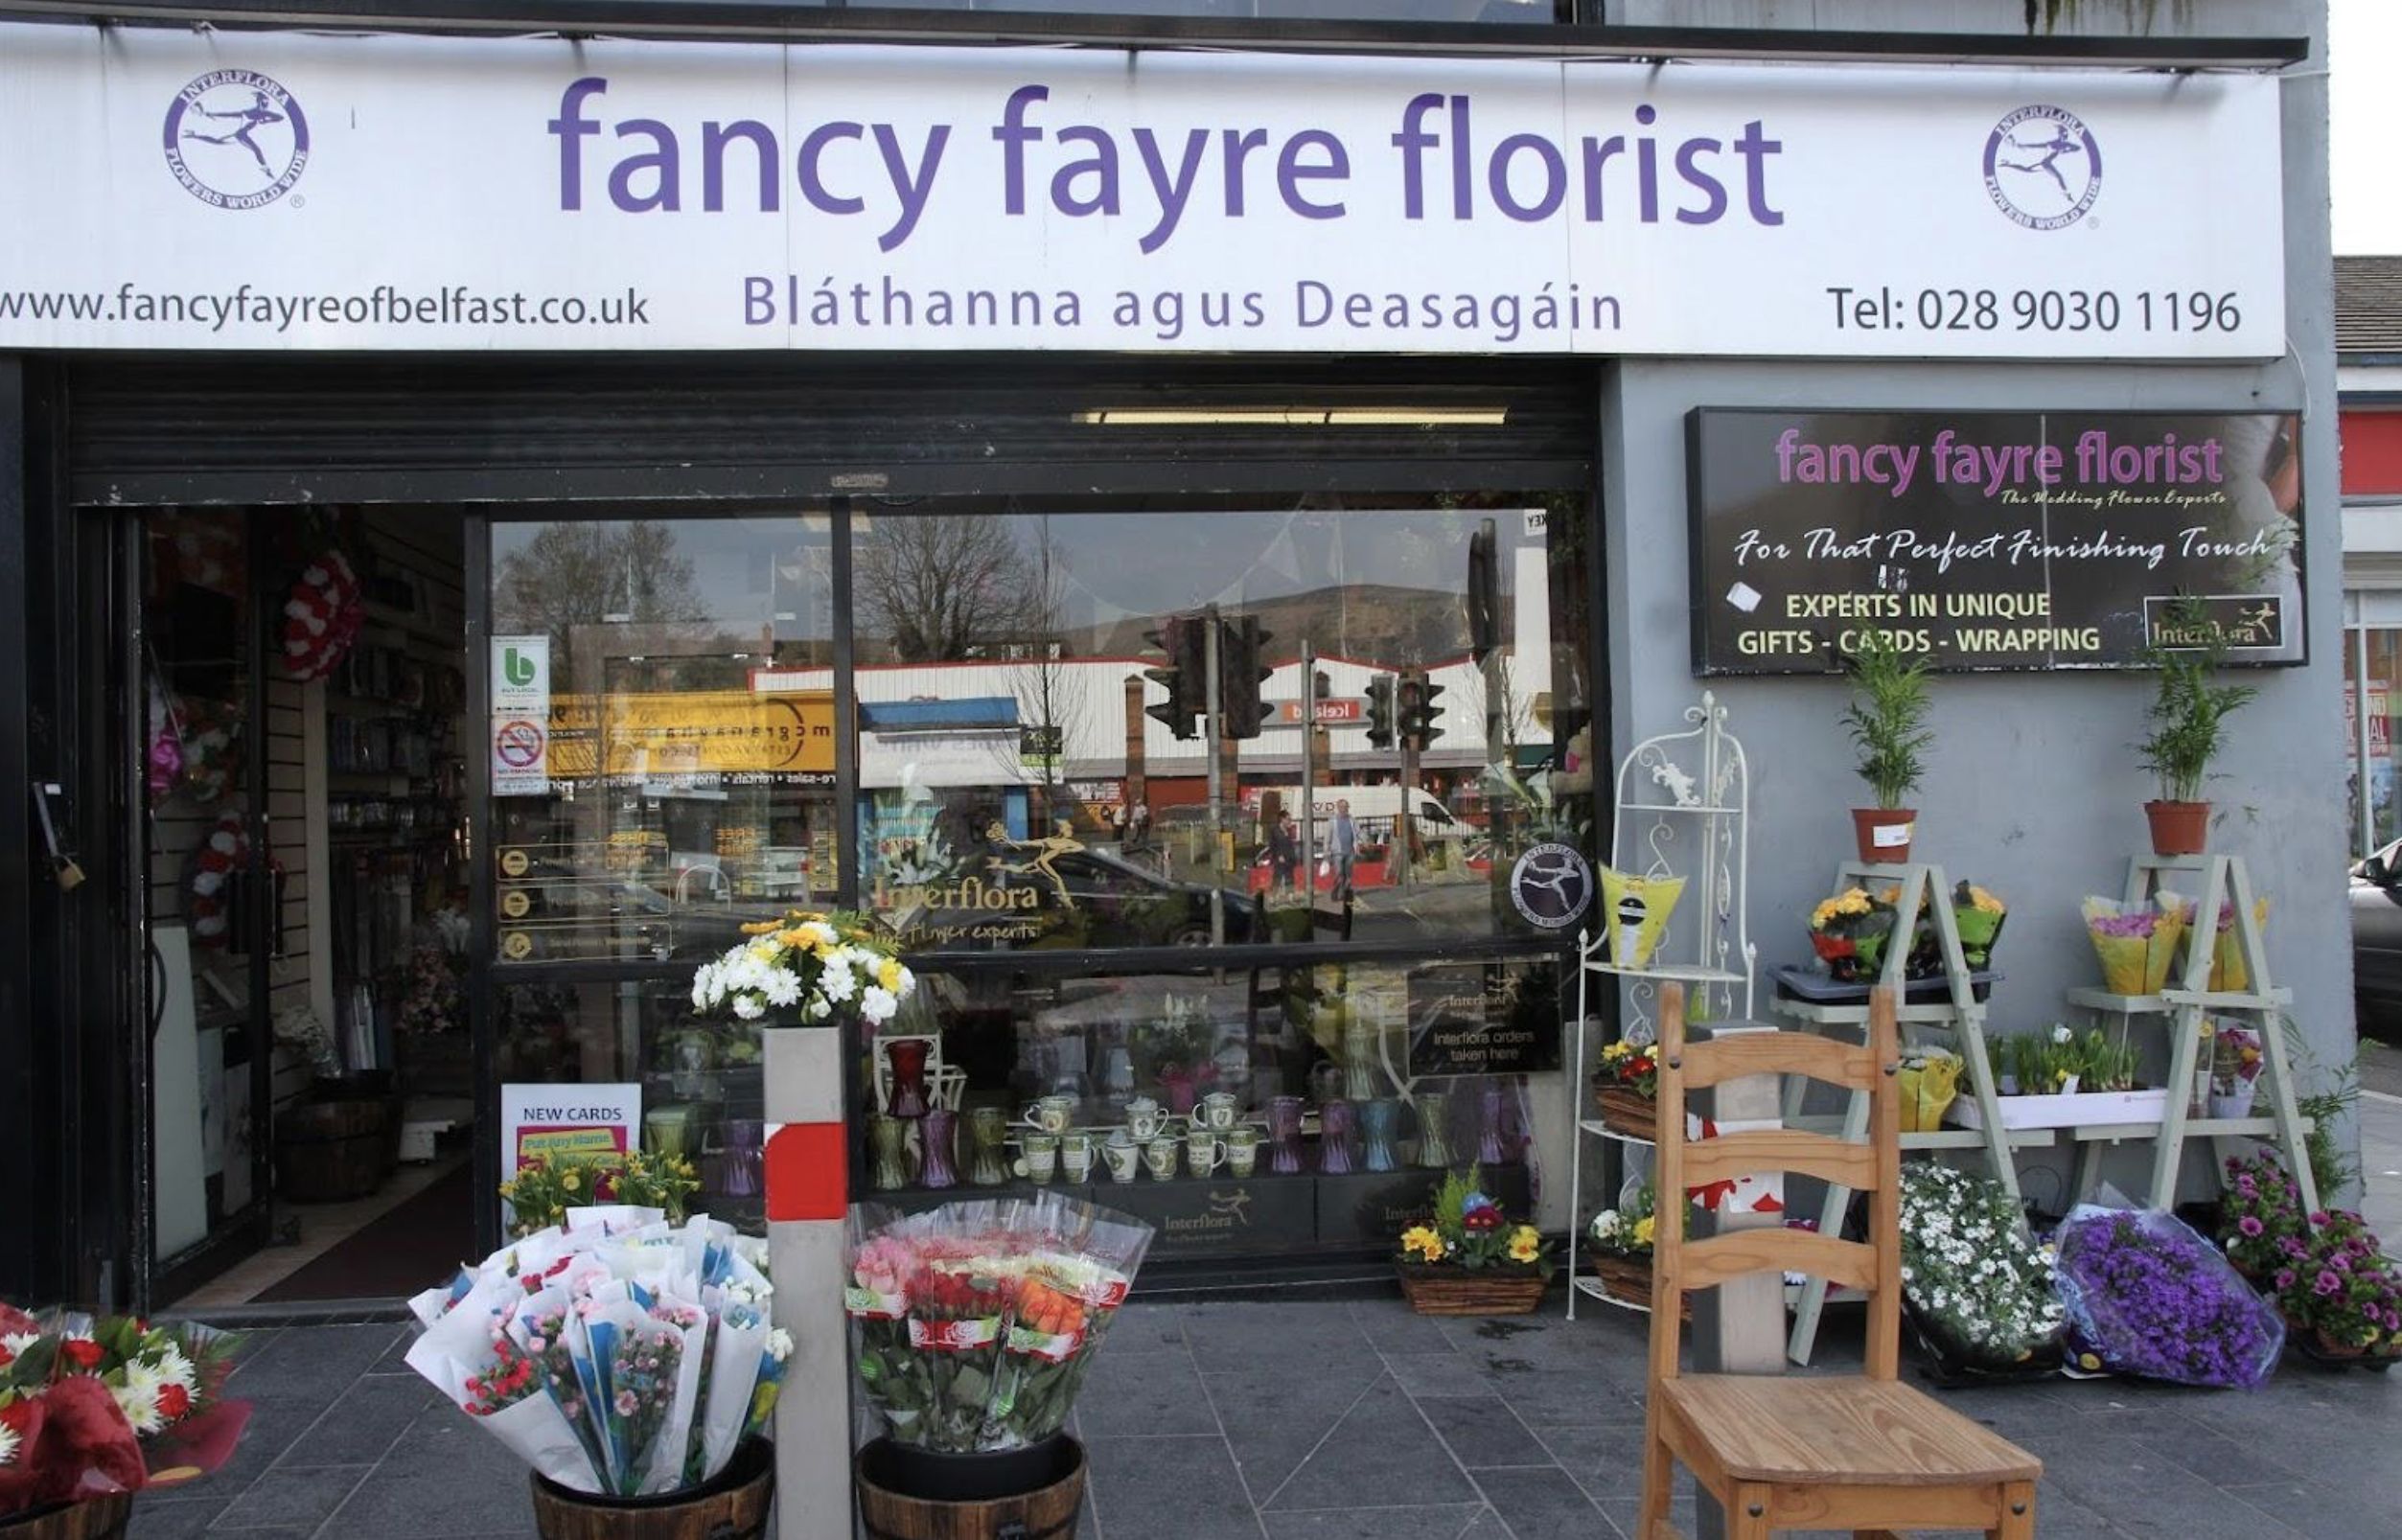 Fancy Fayre Flowers\' excellent reputation is their greatest advert